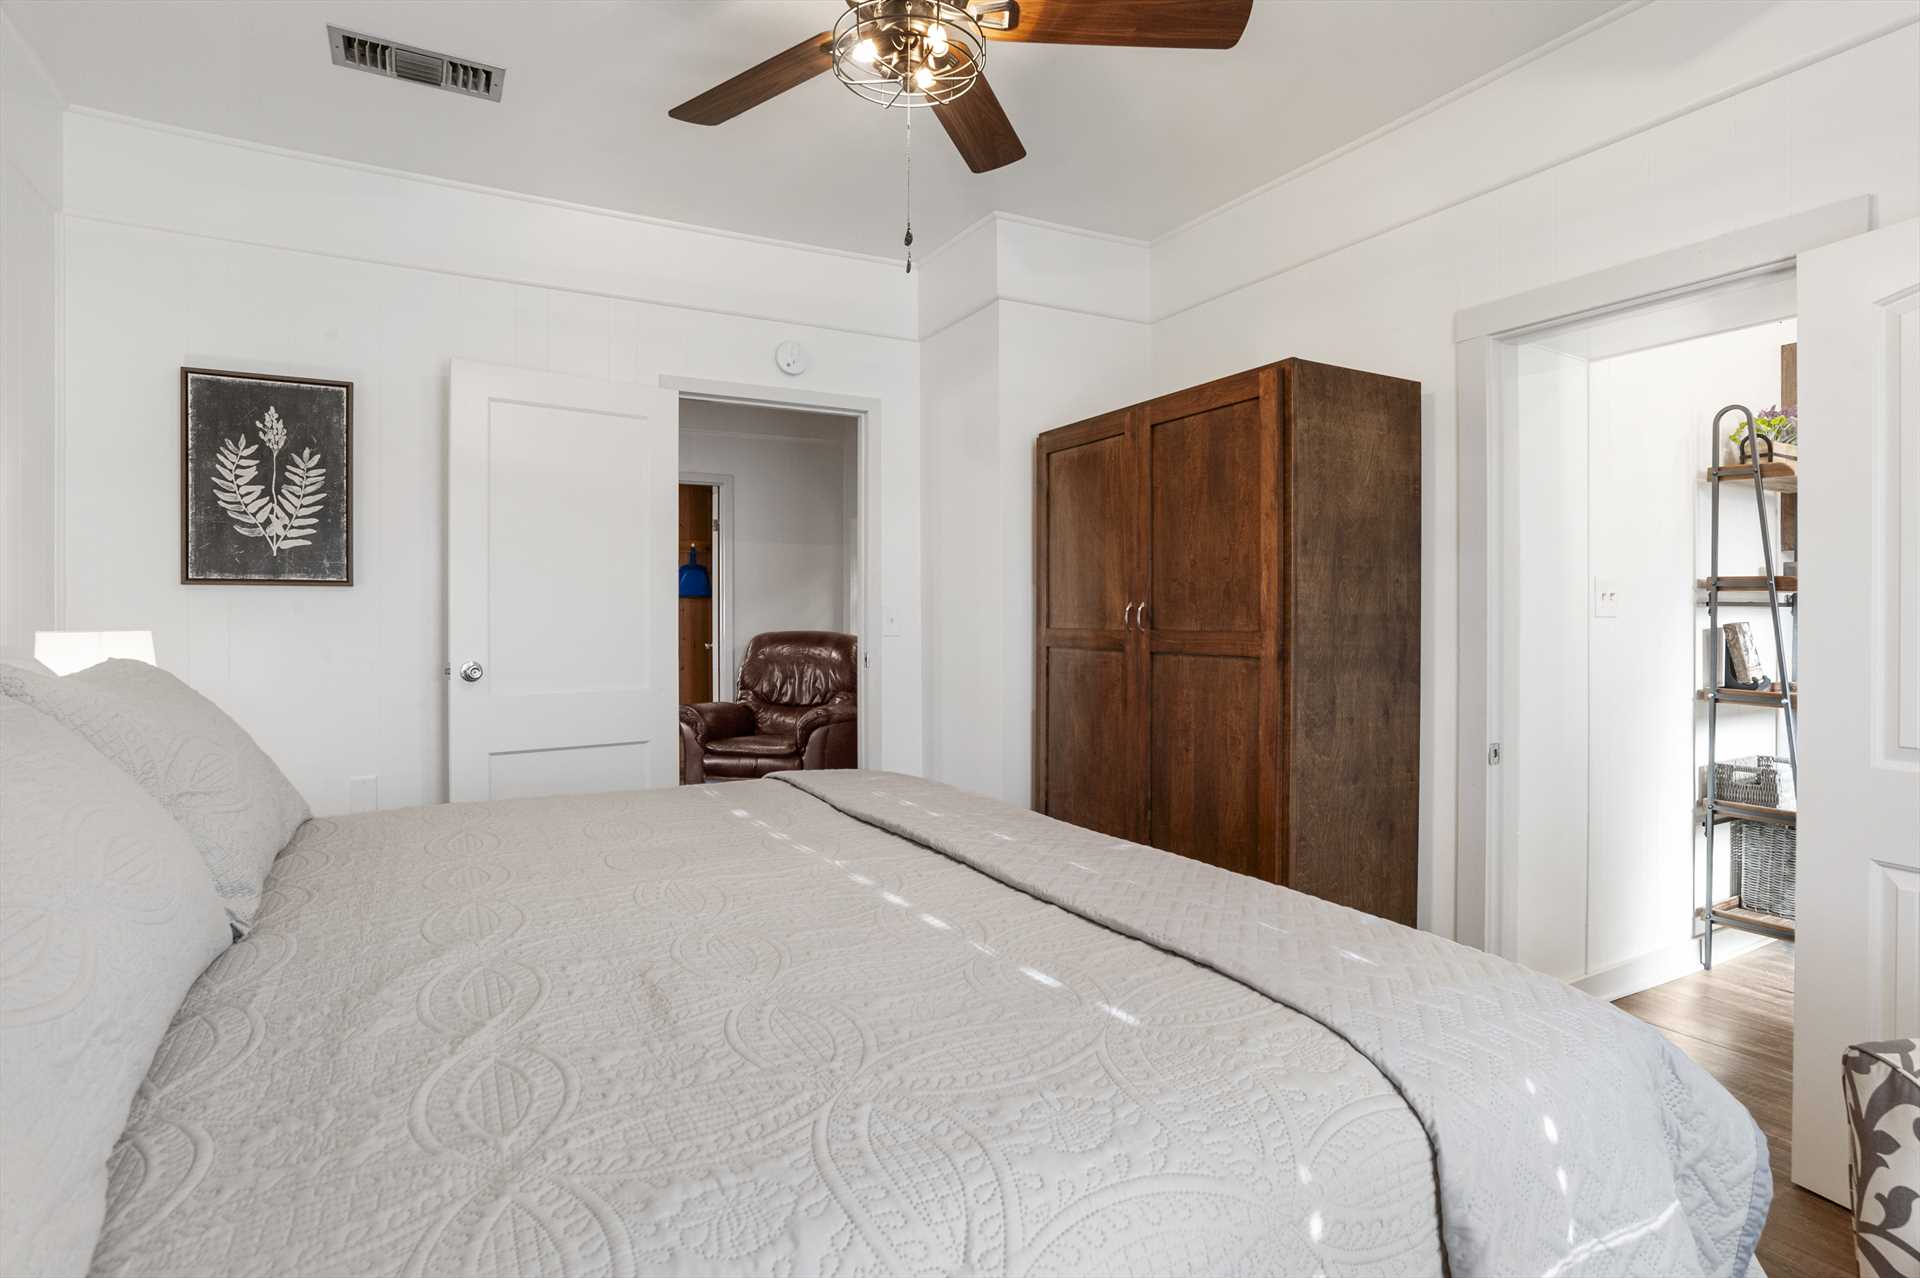                                                 There's a custom armoire for storage in both bedrooms, and the beds are draped in clean linens, too!